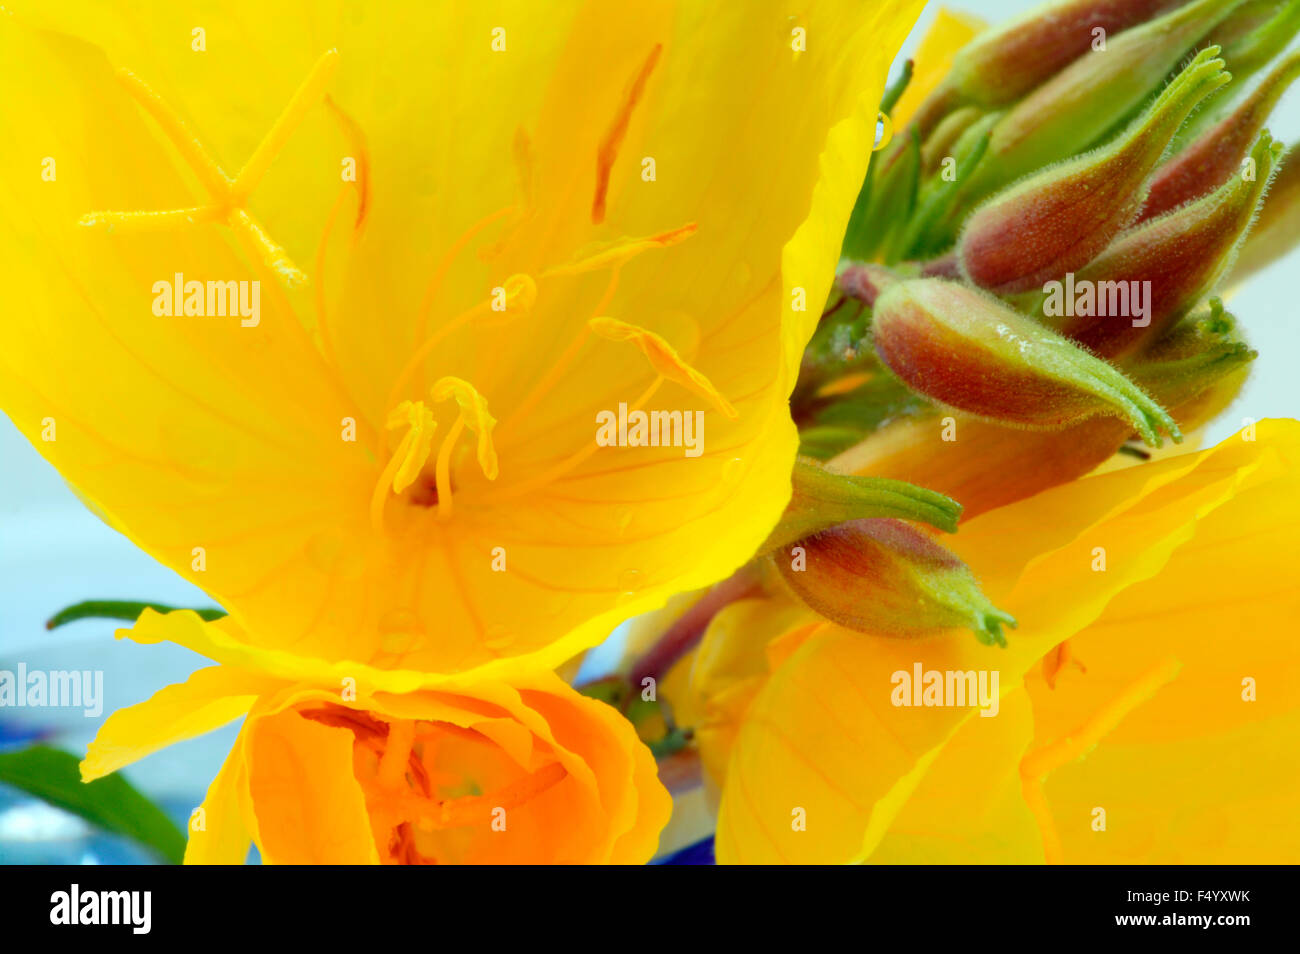 Oenothera 'Fruticosa Youngii' (Evening Primrose). Close up of yellow flowers and buds in a blue glass. July UK. Stock Photo